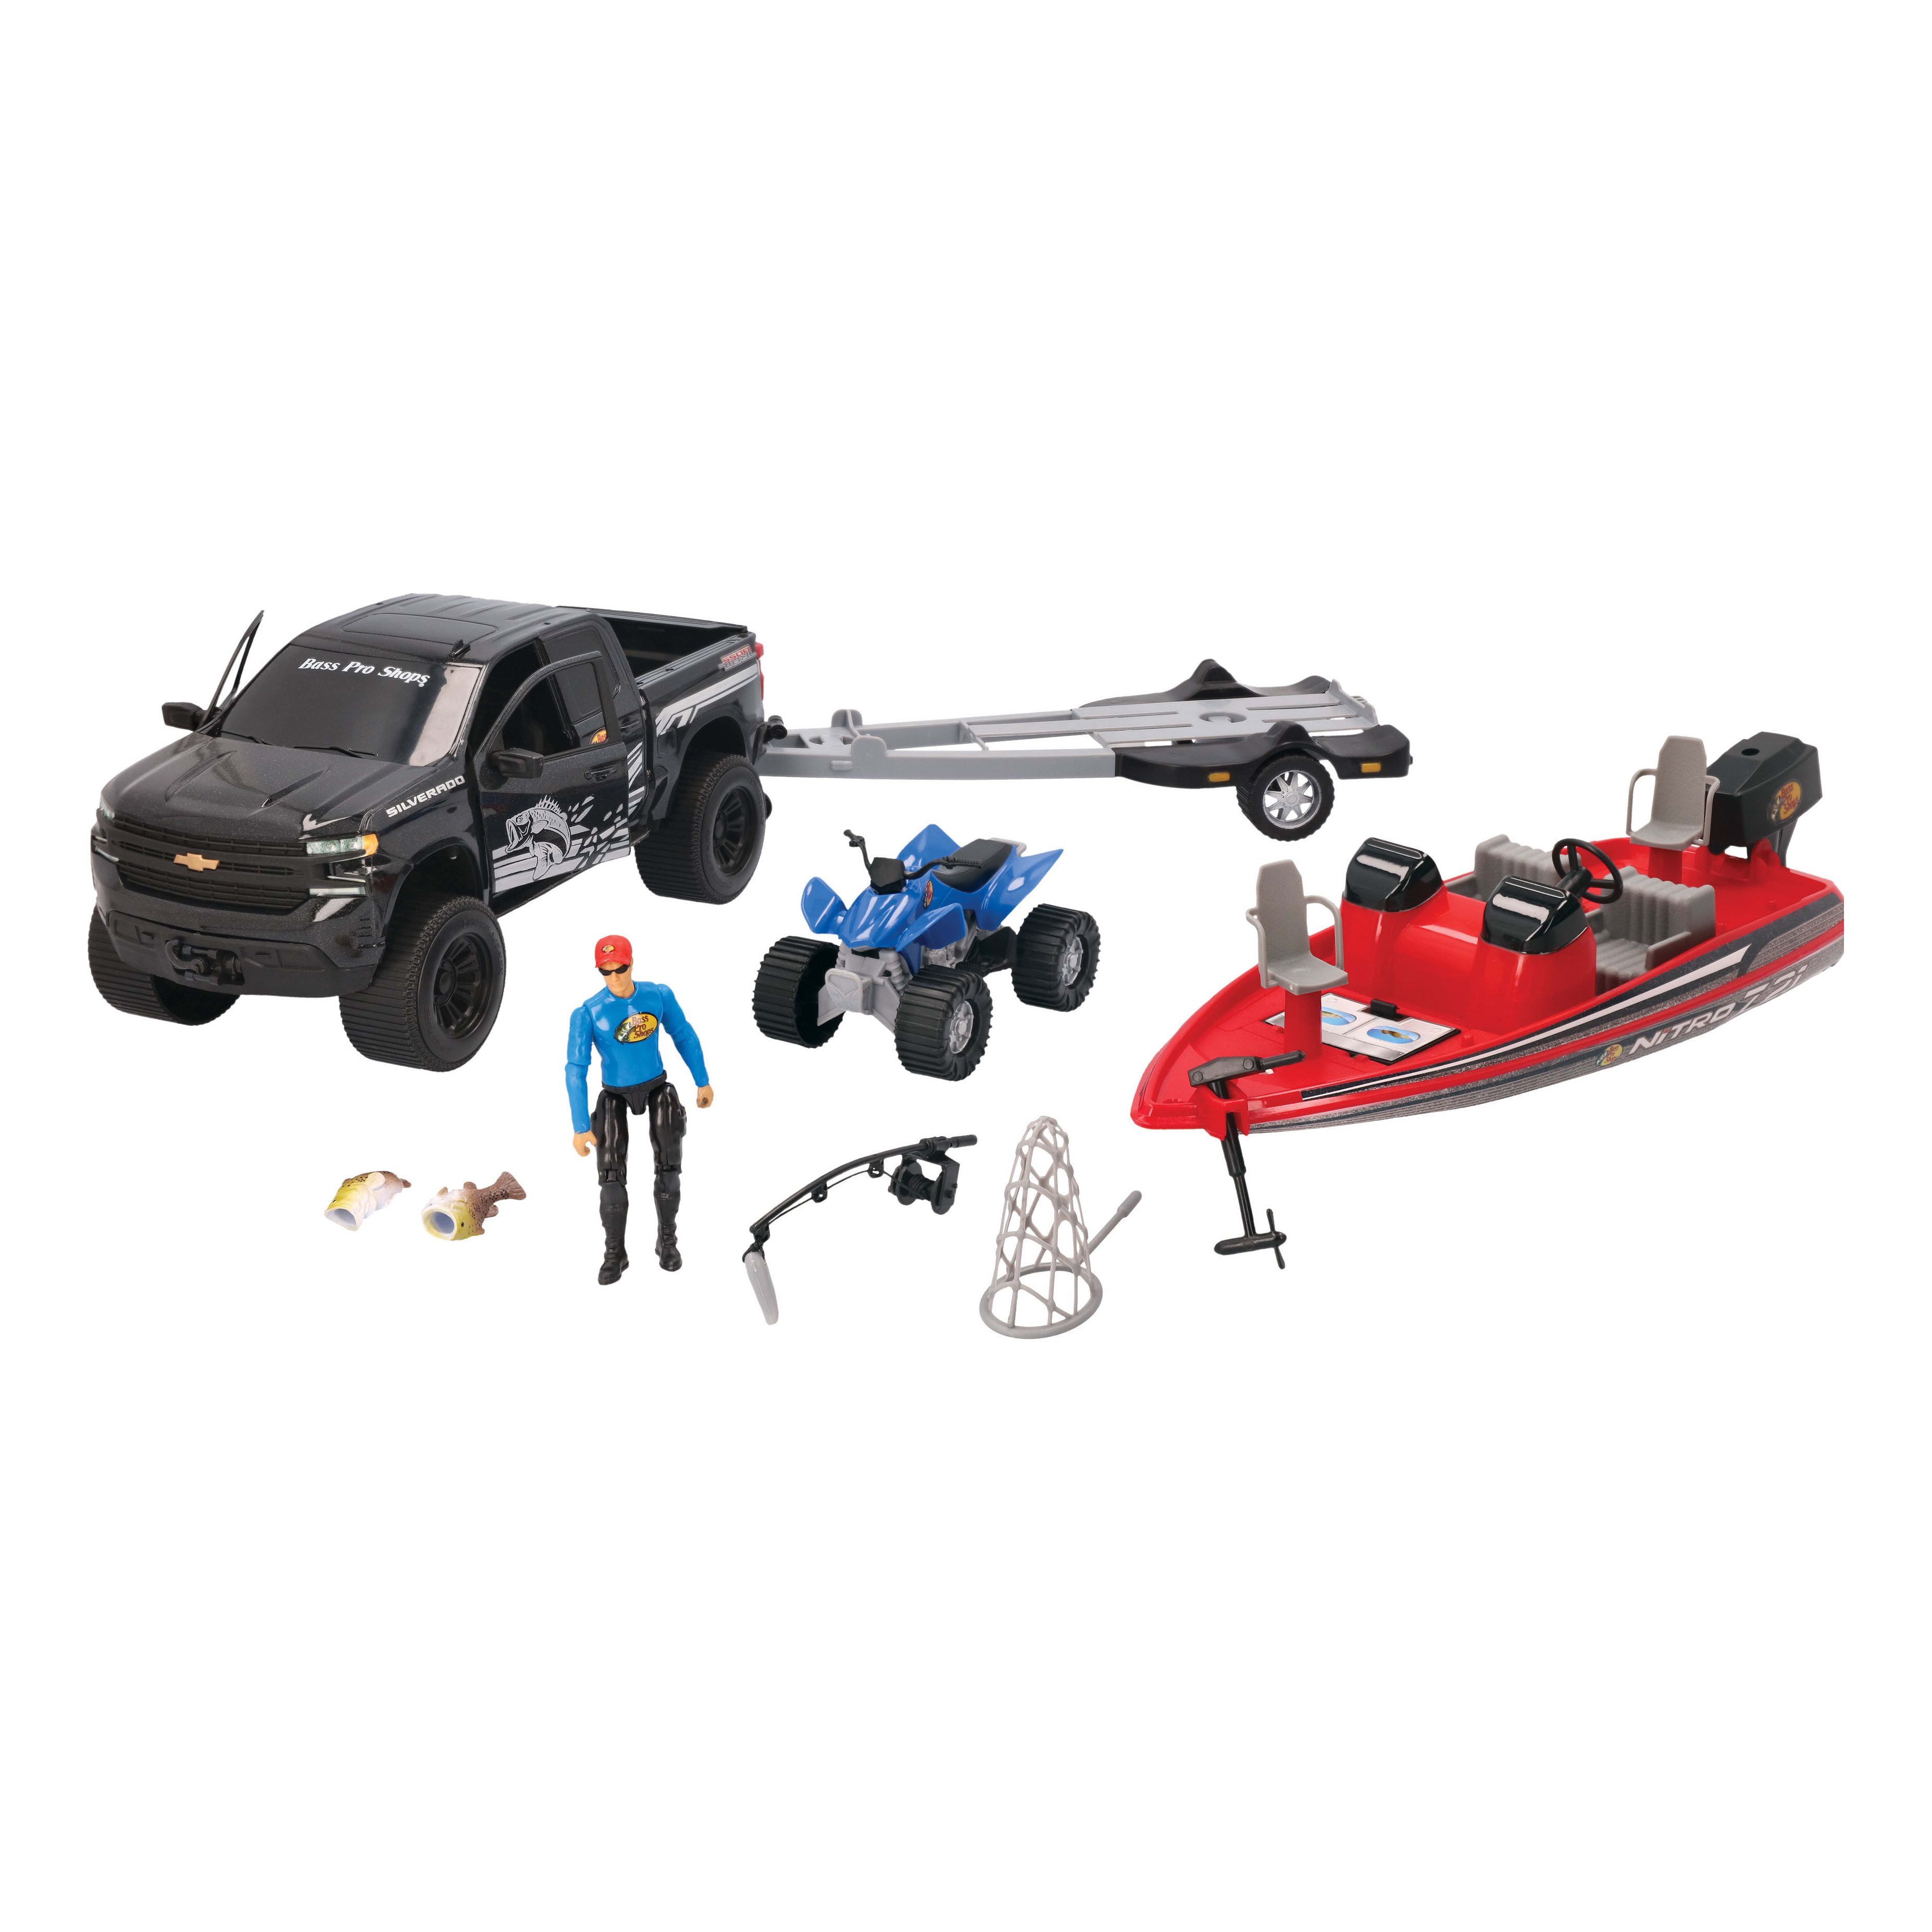 Bass Pro Shops® Imagination Adventure Ford Raptor with Bass Boat Play Set for Kids